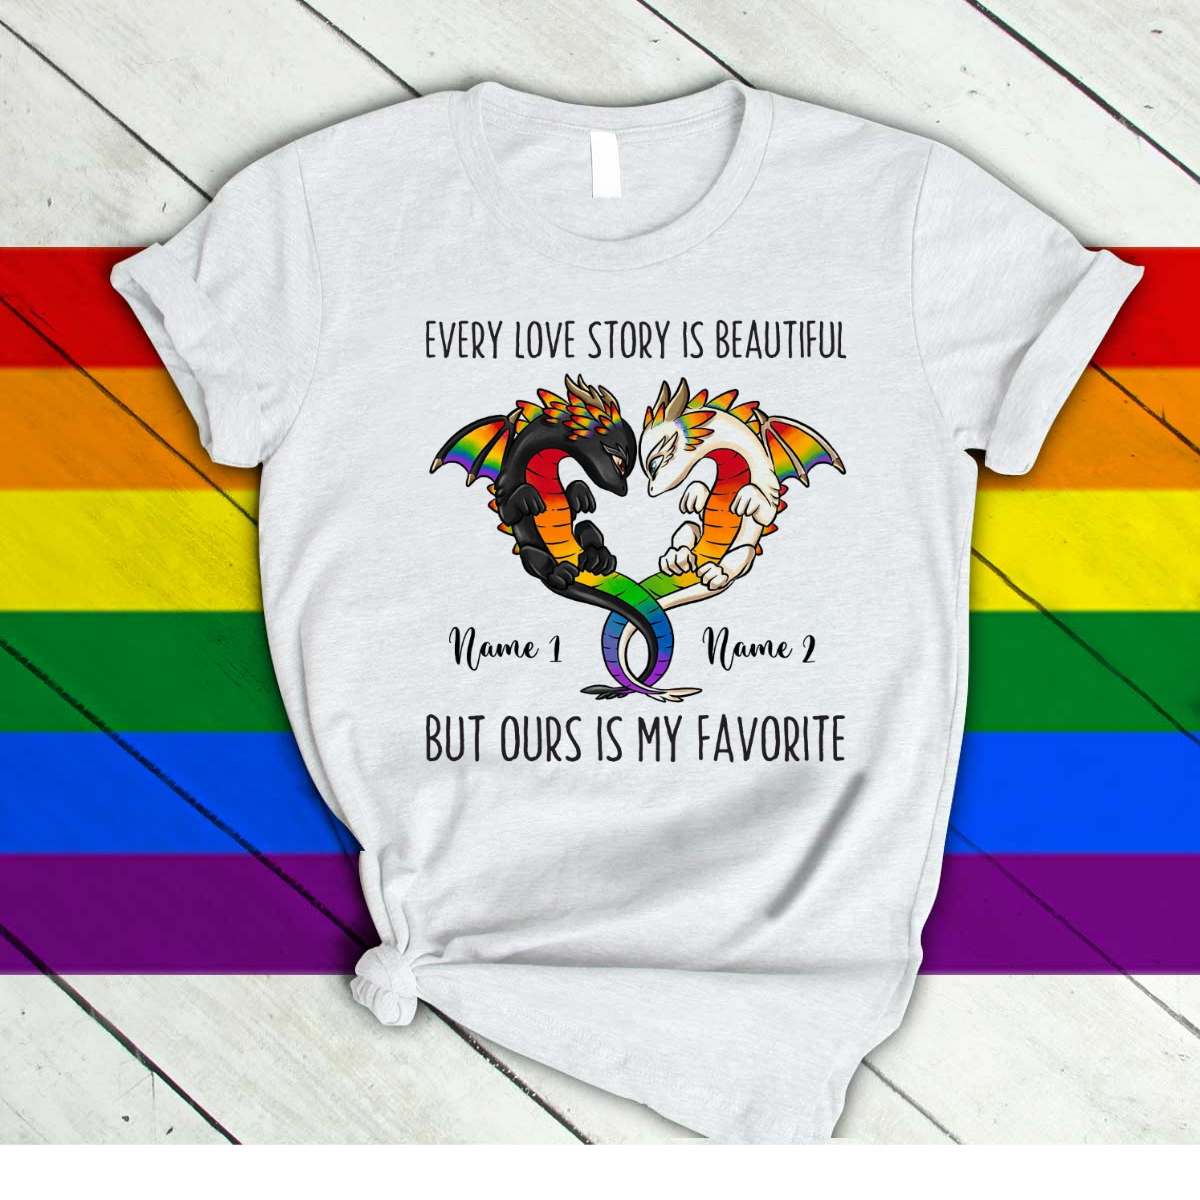 Customized Pride T Shirt/ Gift LGBT Couple/ Lesbian Couple/ Every Love Story Is Beautiful